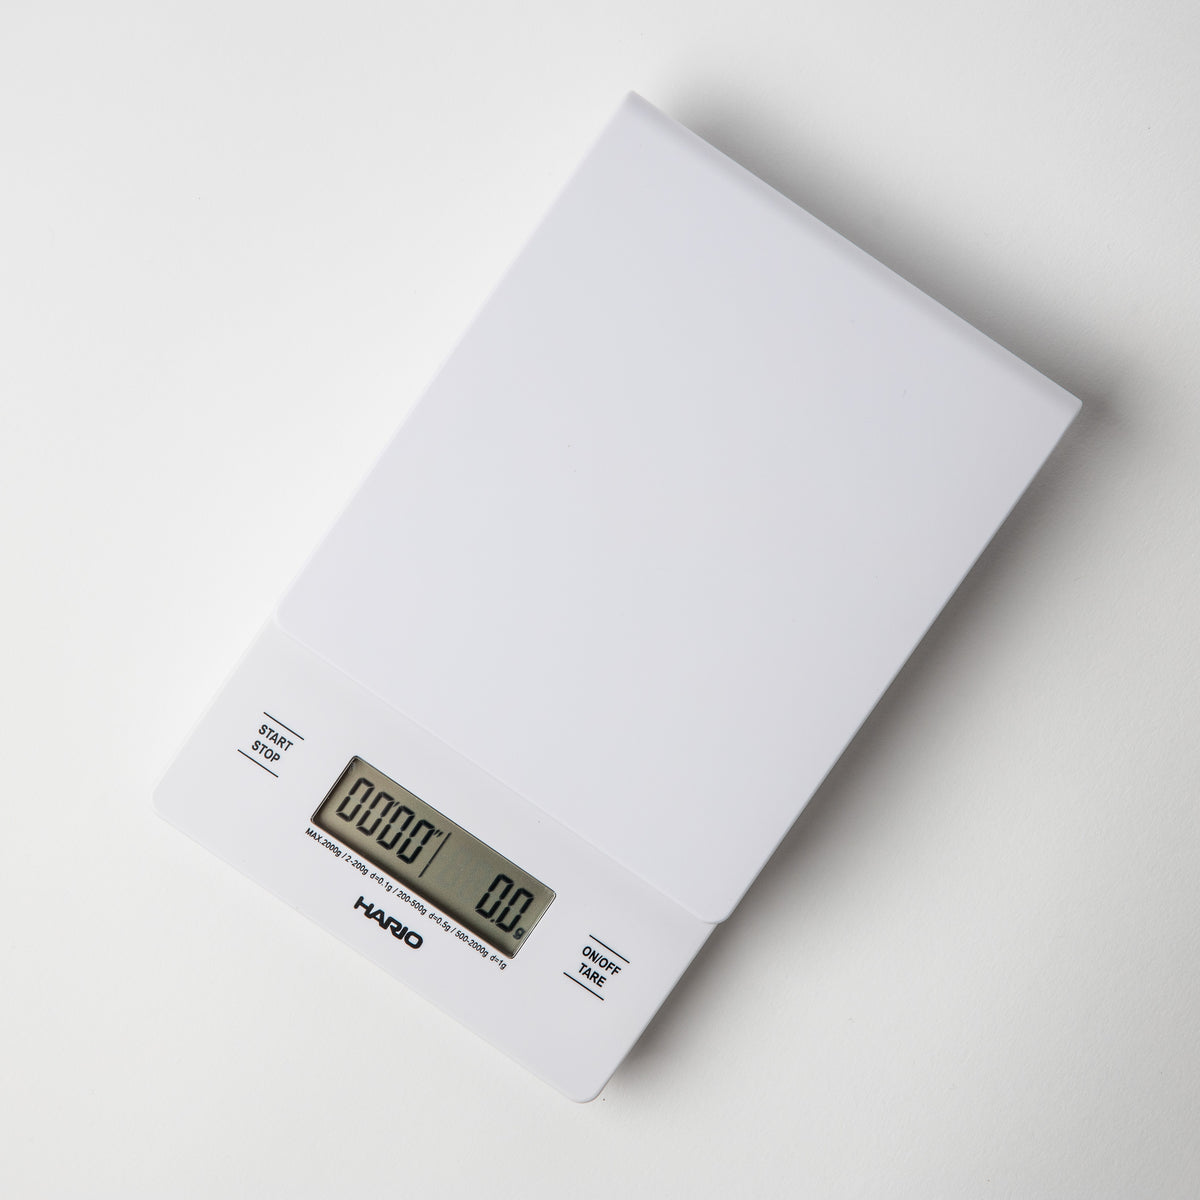 Hario Digital Scale with Timer – Be Bright Coffee